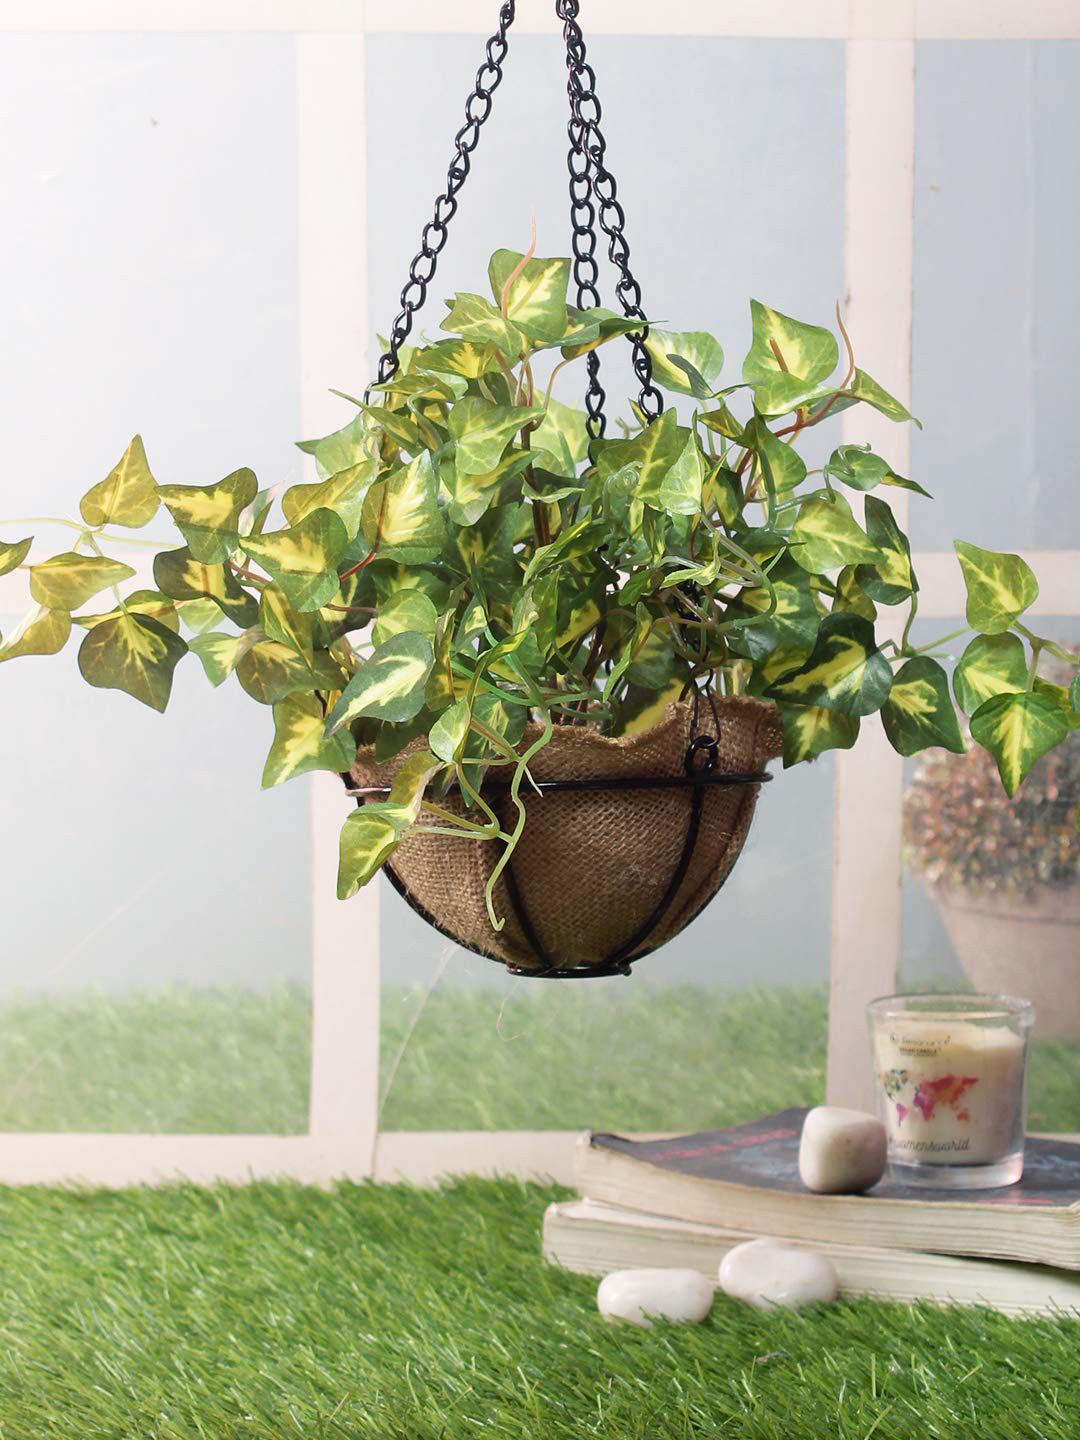 PolliNation Green Artificial Ivy Creeper in Jute Basket with Hanging Metal Stand Price in India